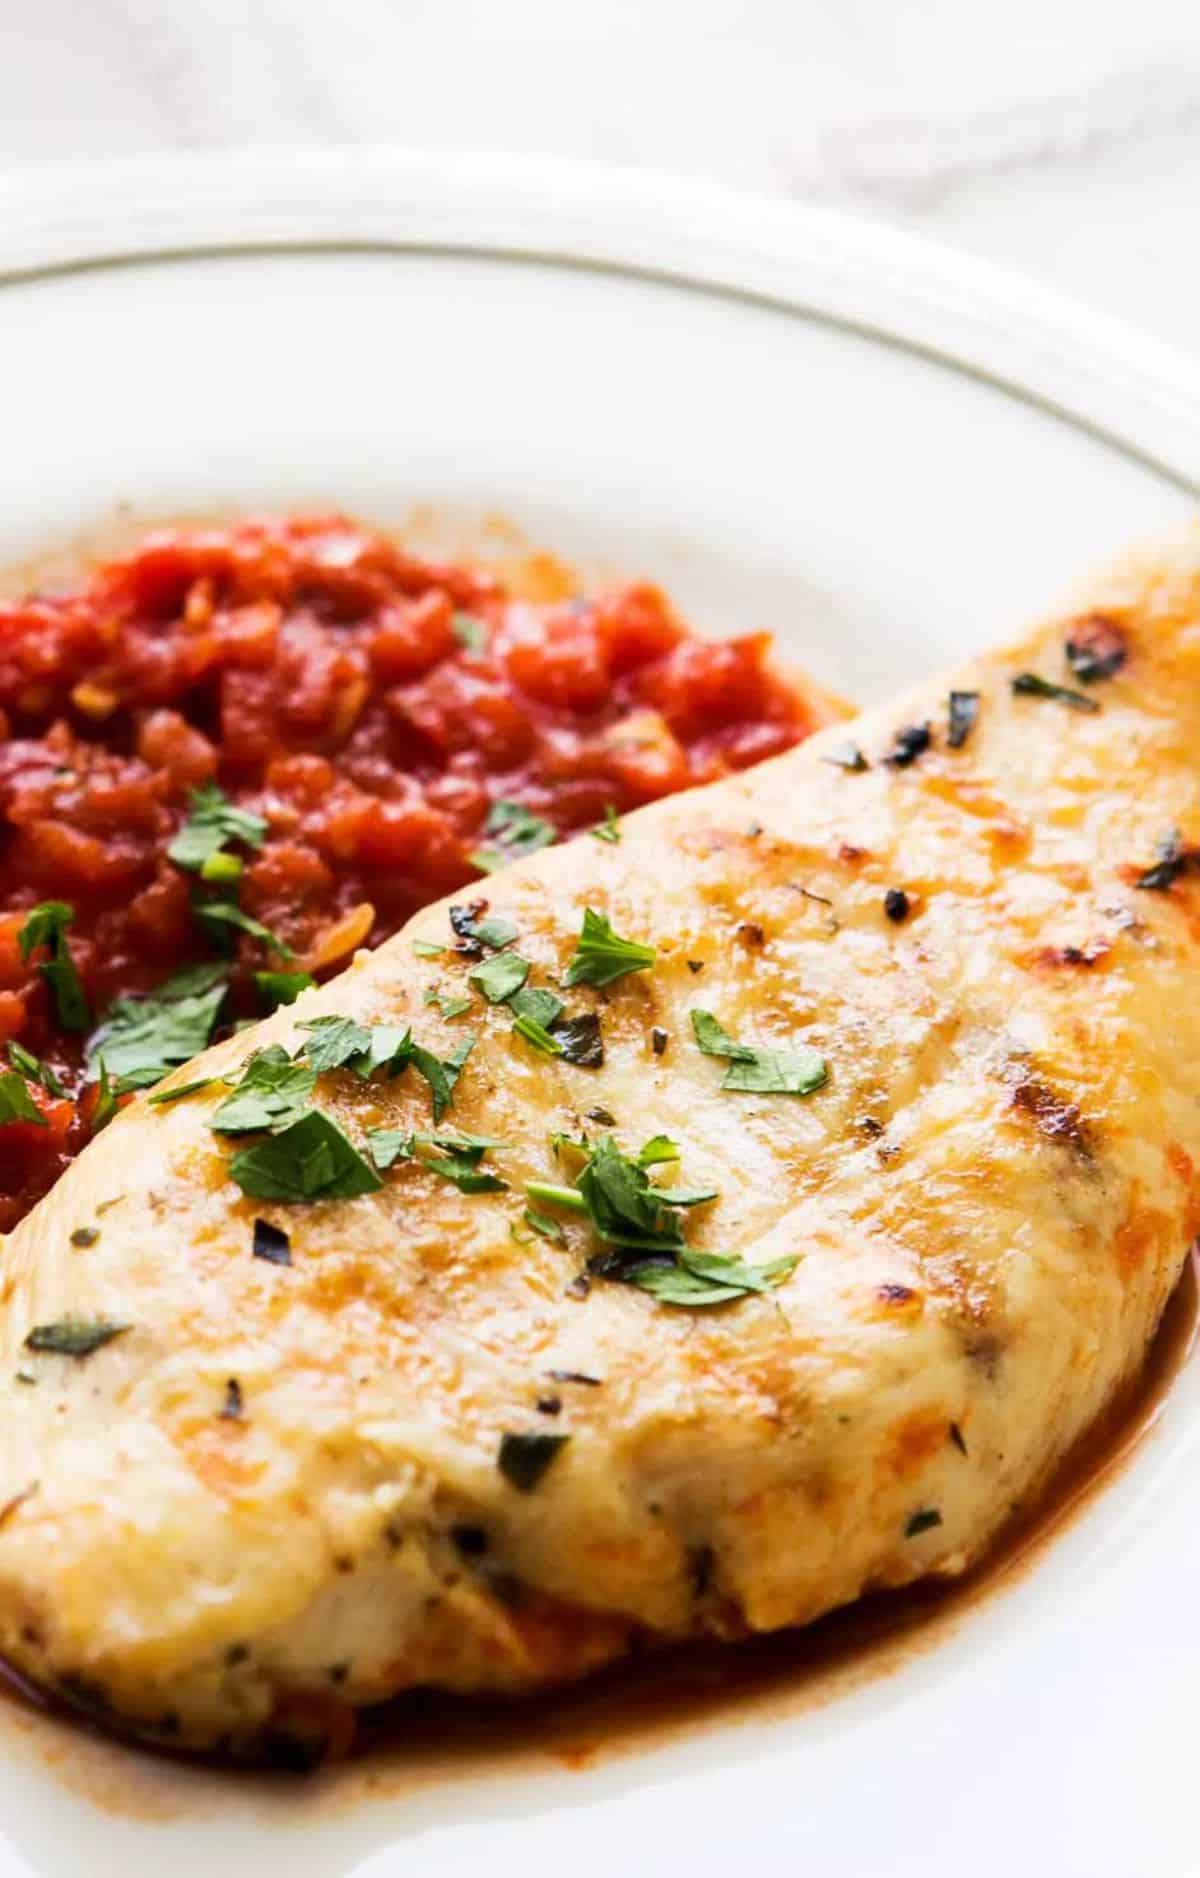 Delicious Grilled Chicken Tarragon With Tomato Sauce on a white plate.